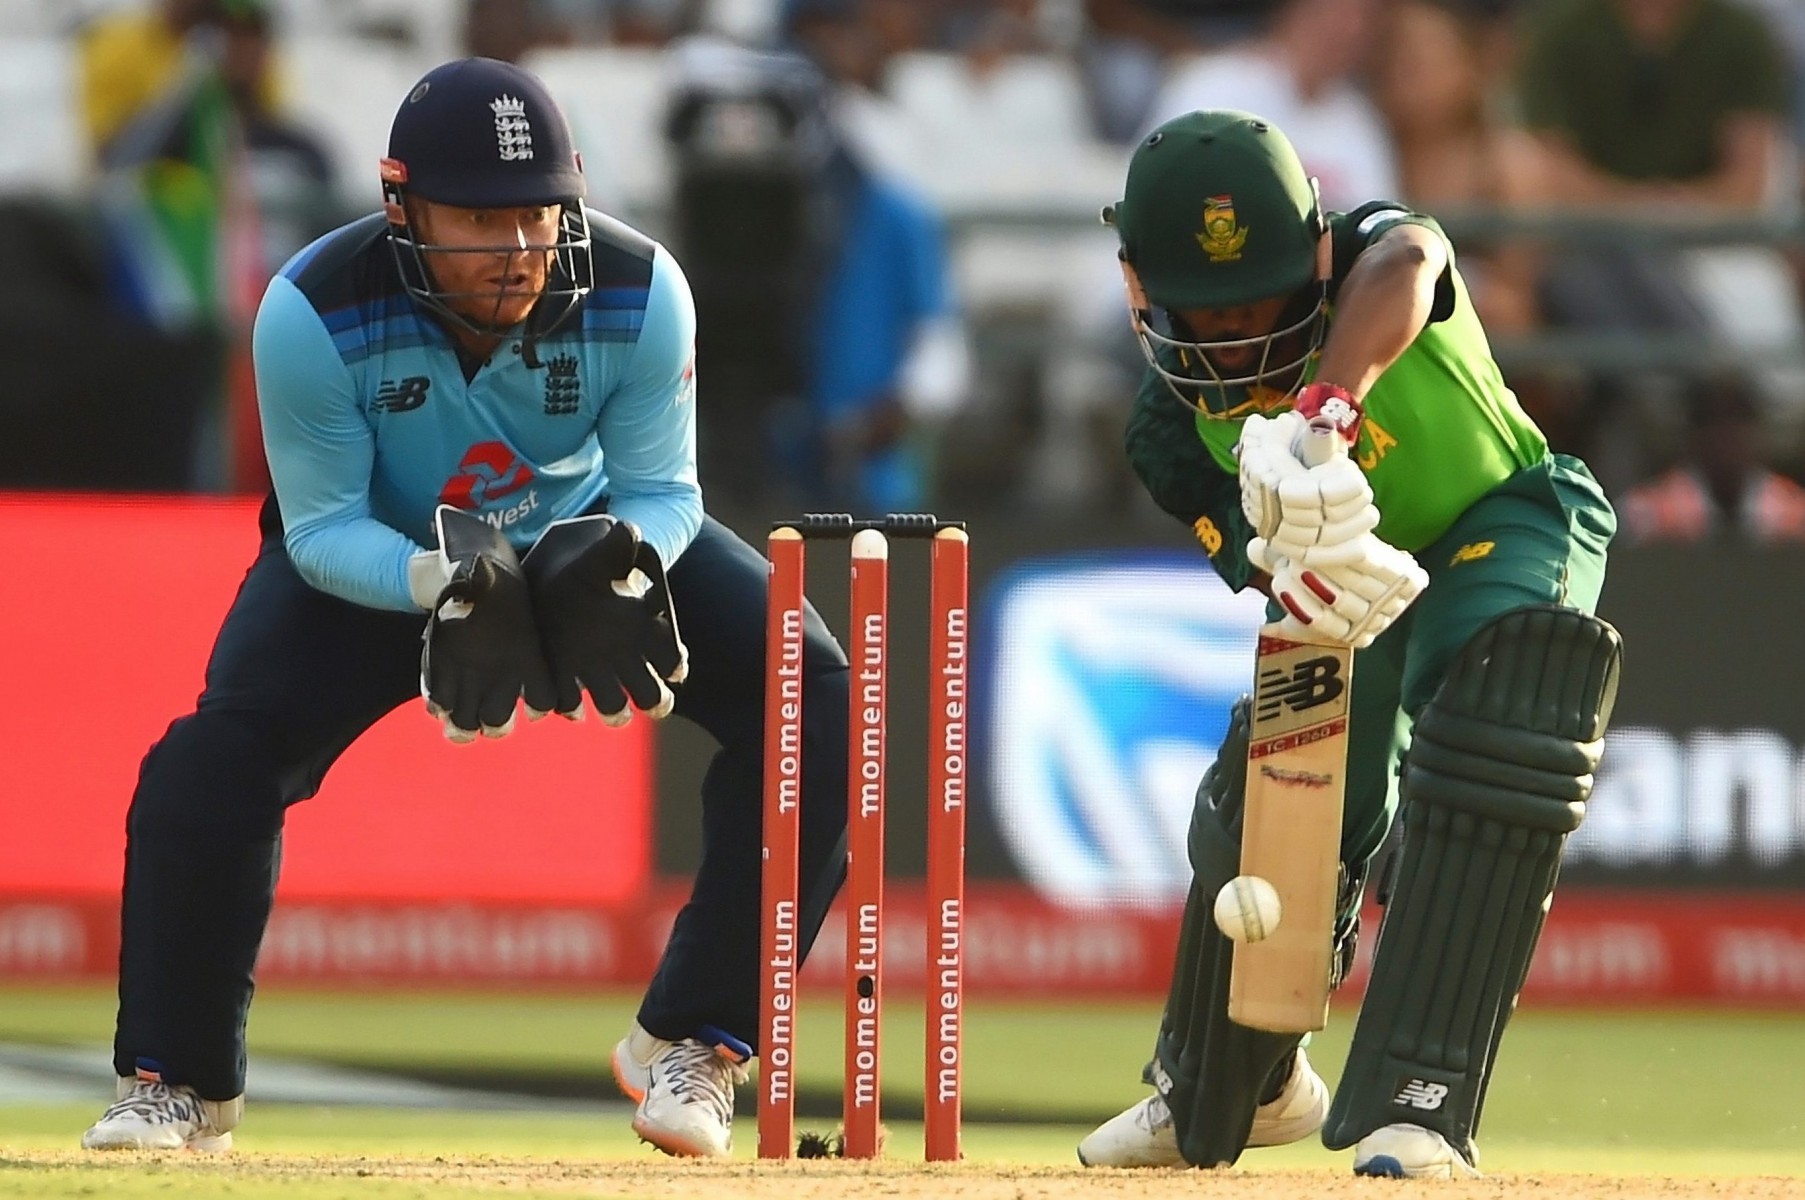 Temba Bavuma stroked 98 to take the game away from England along with opener Quinton de Kock